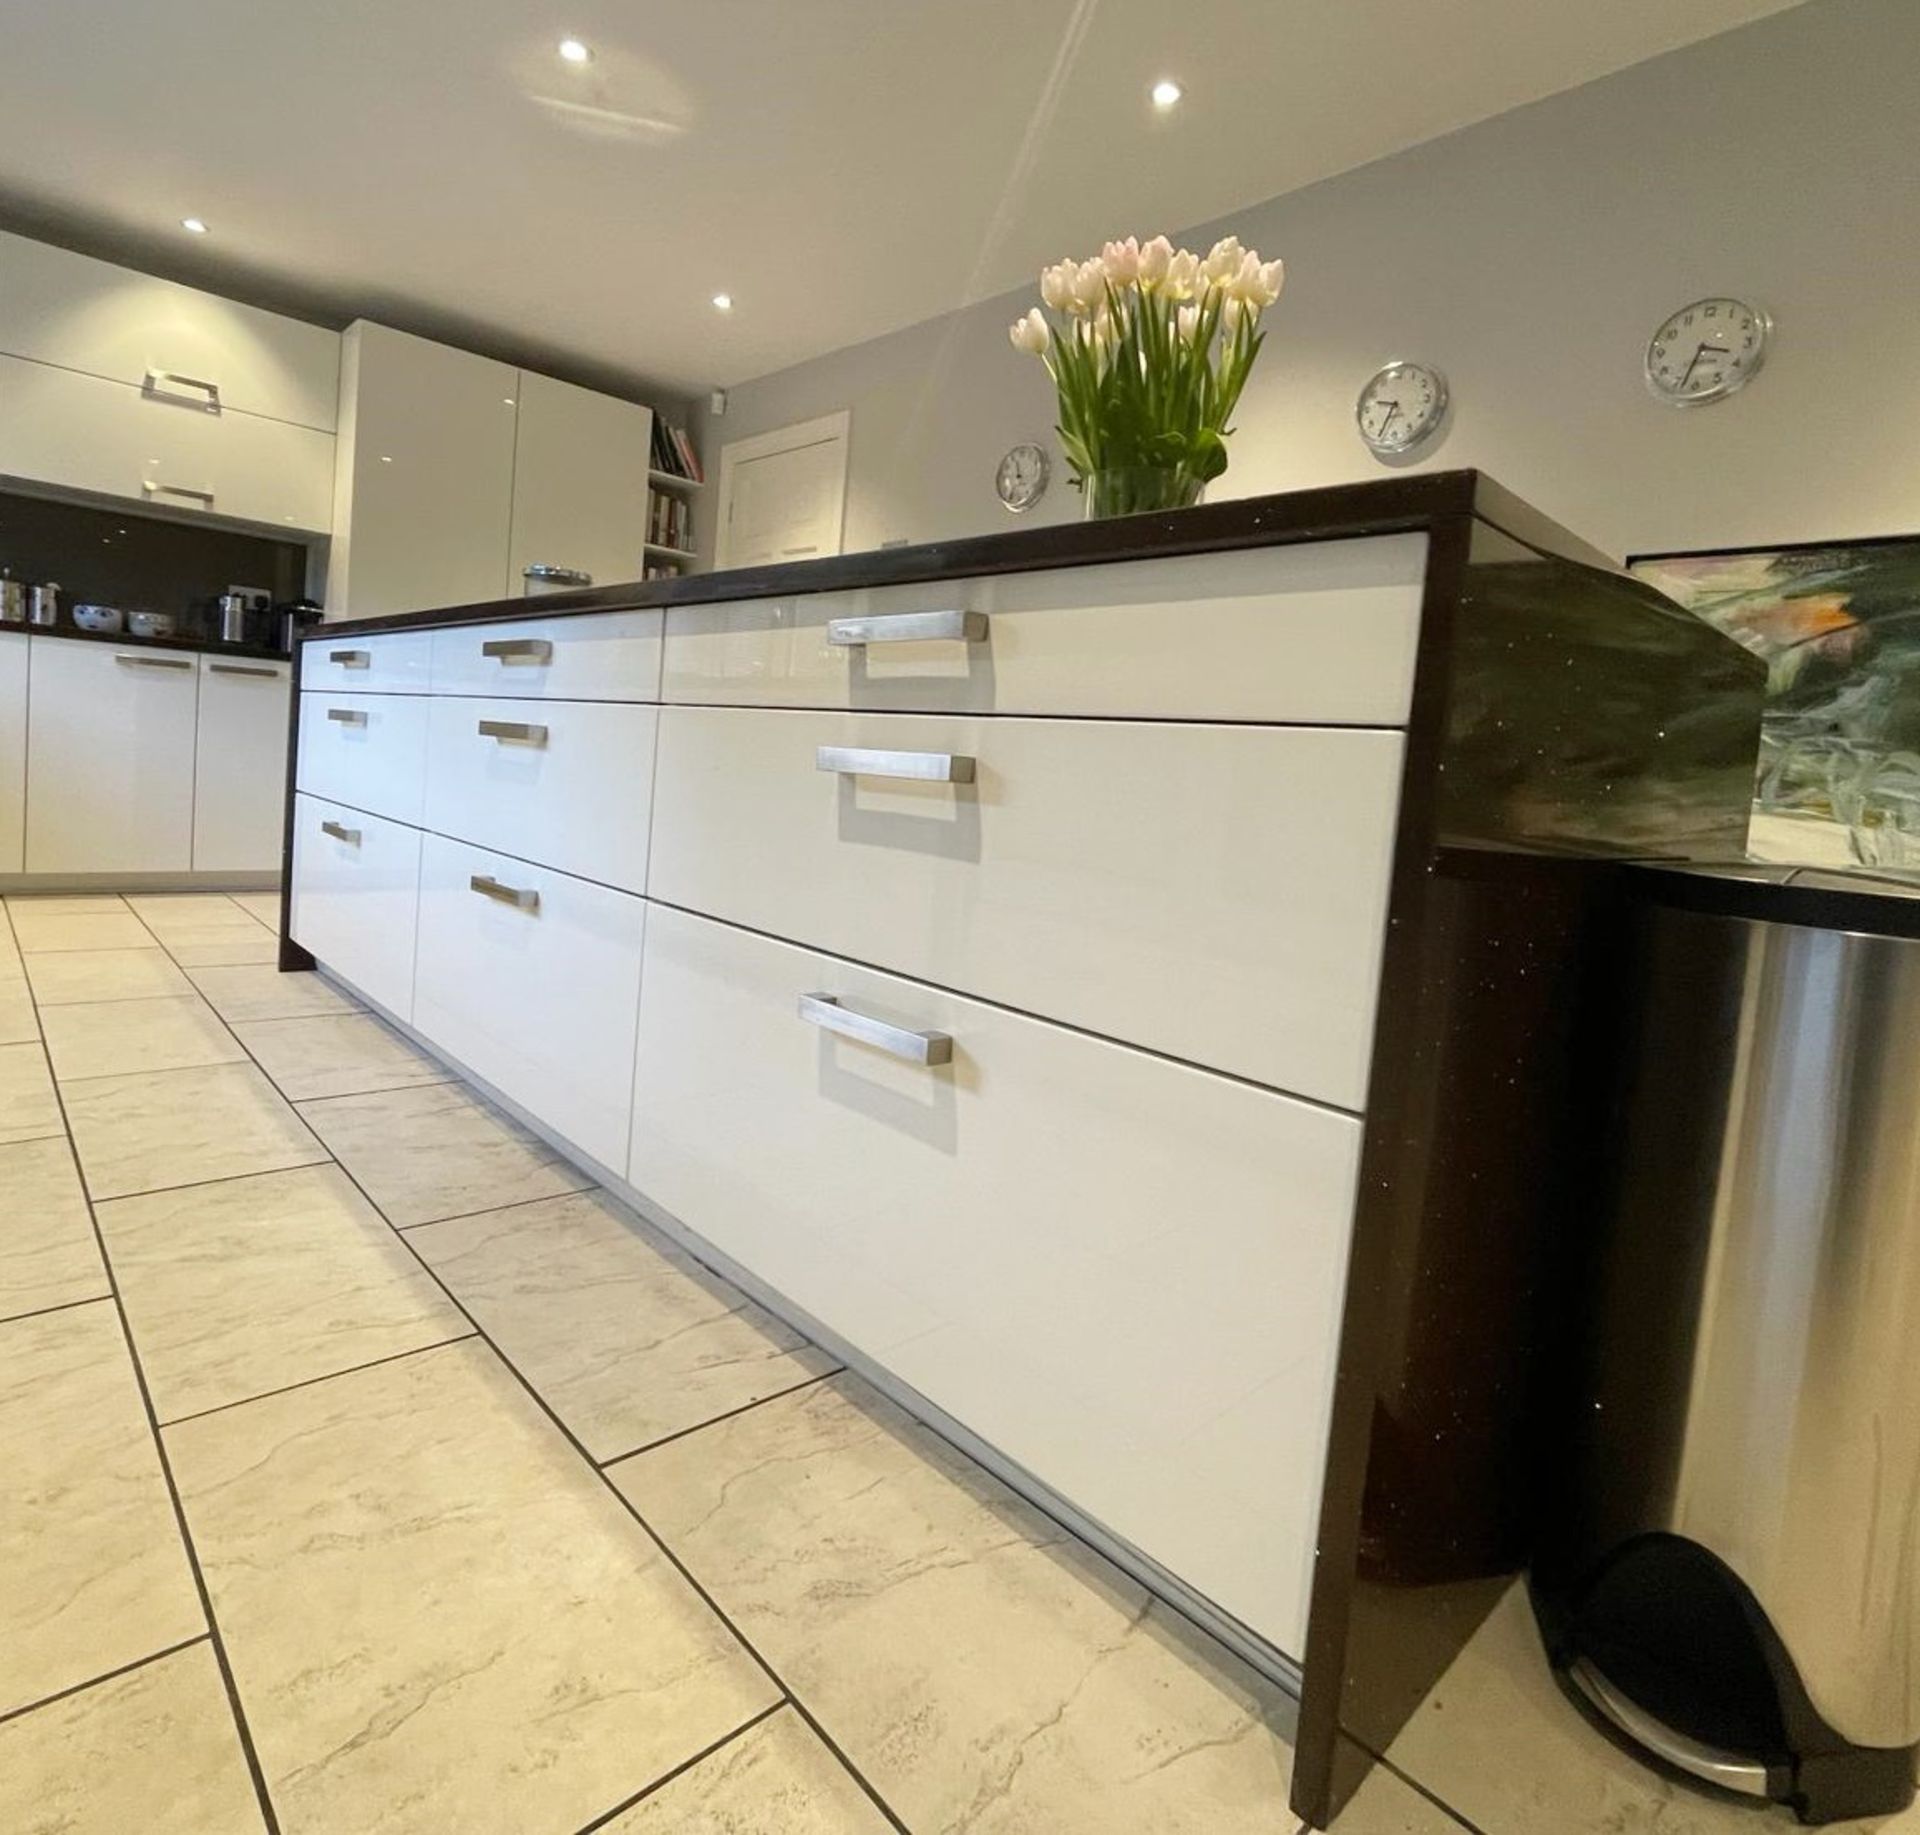 1 x ALNO Bespoke Fitted White Kitchen with Central Island, Neff & Miele Appliances, Quartz Surfaces - Image 6 of 85